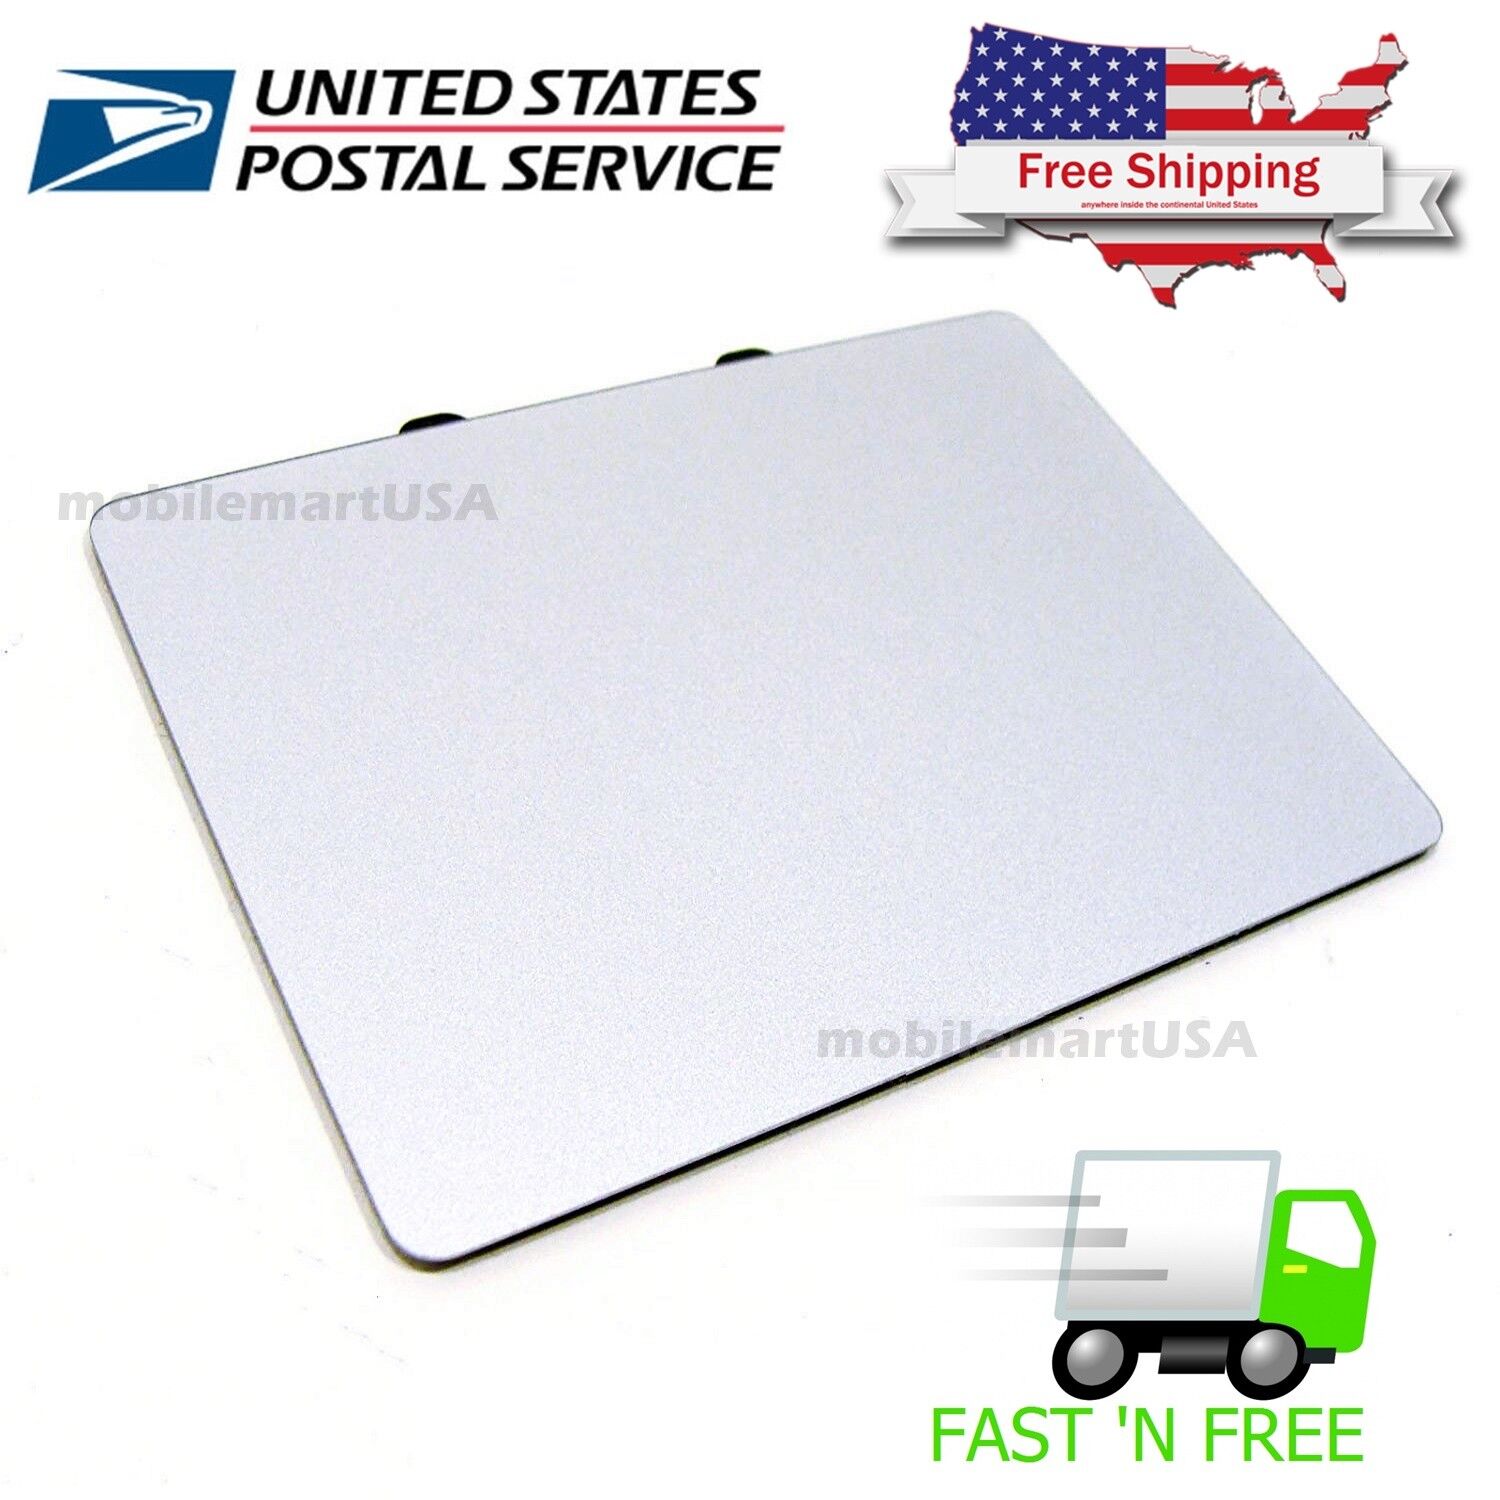 Trackpad Touchpad for Apple MacBook Pro 13” A1278, 15” A1286 2009 2010 2011 2012